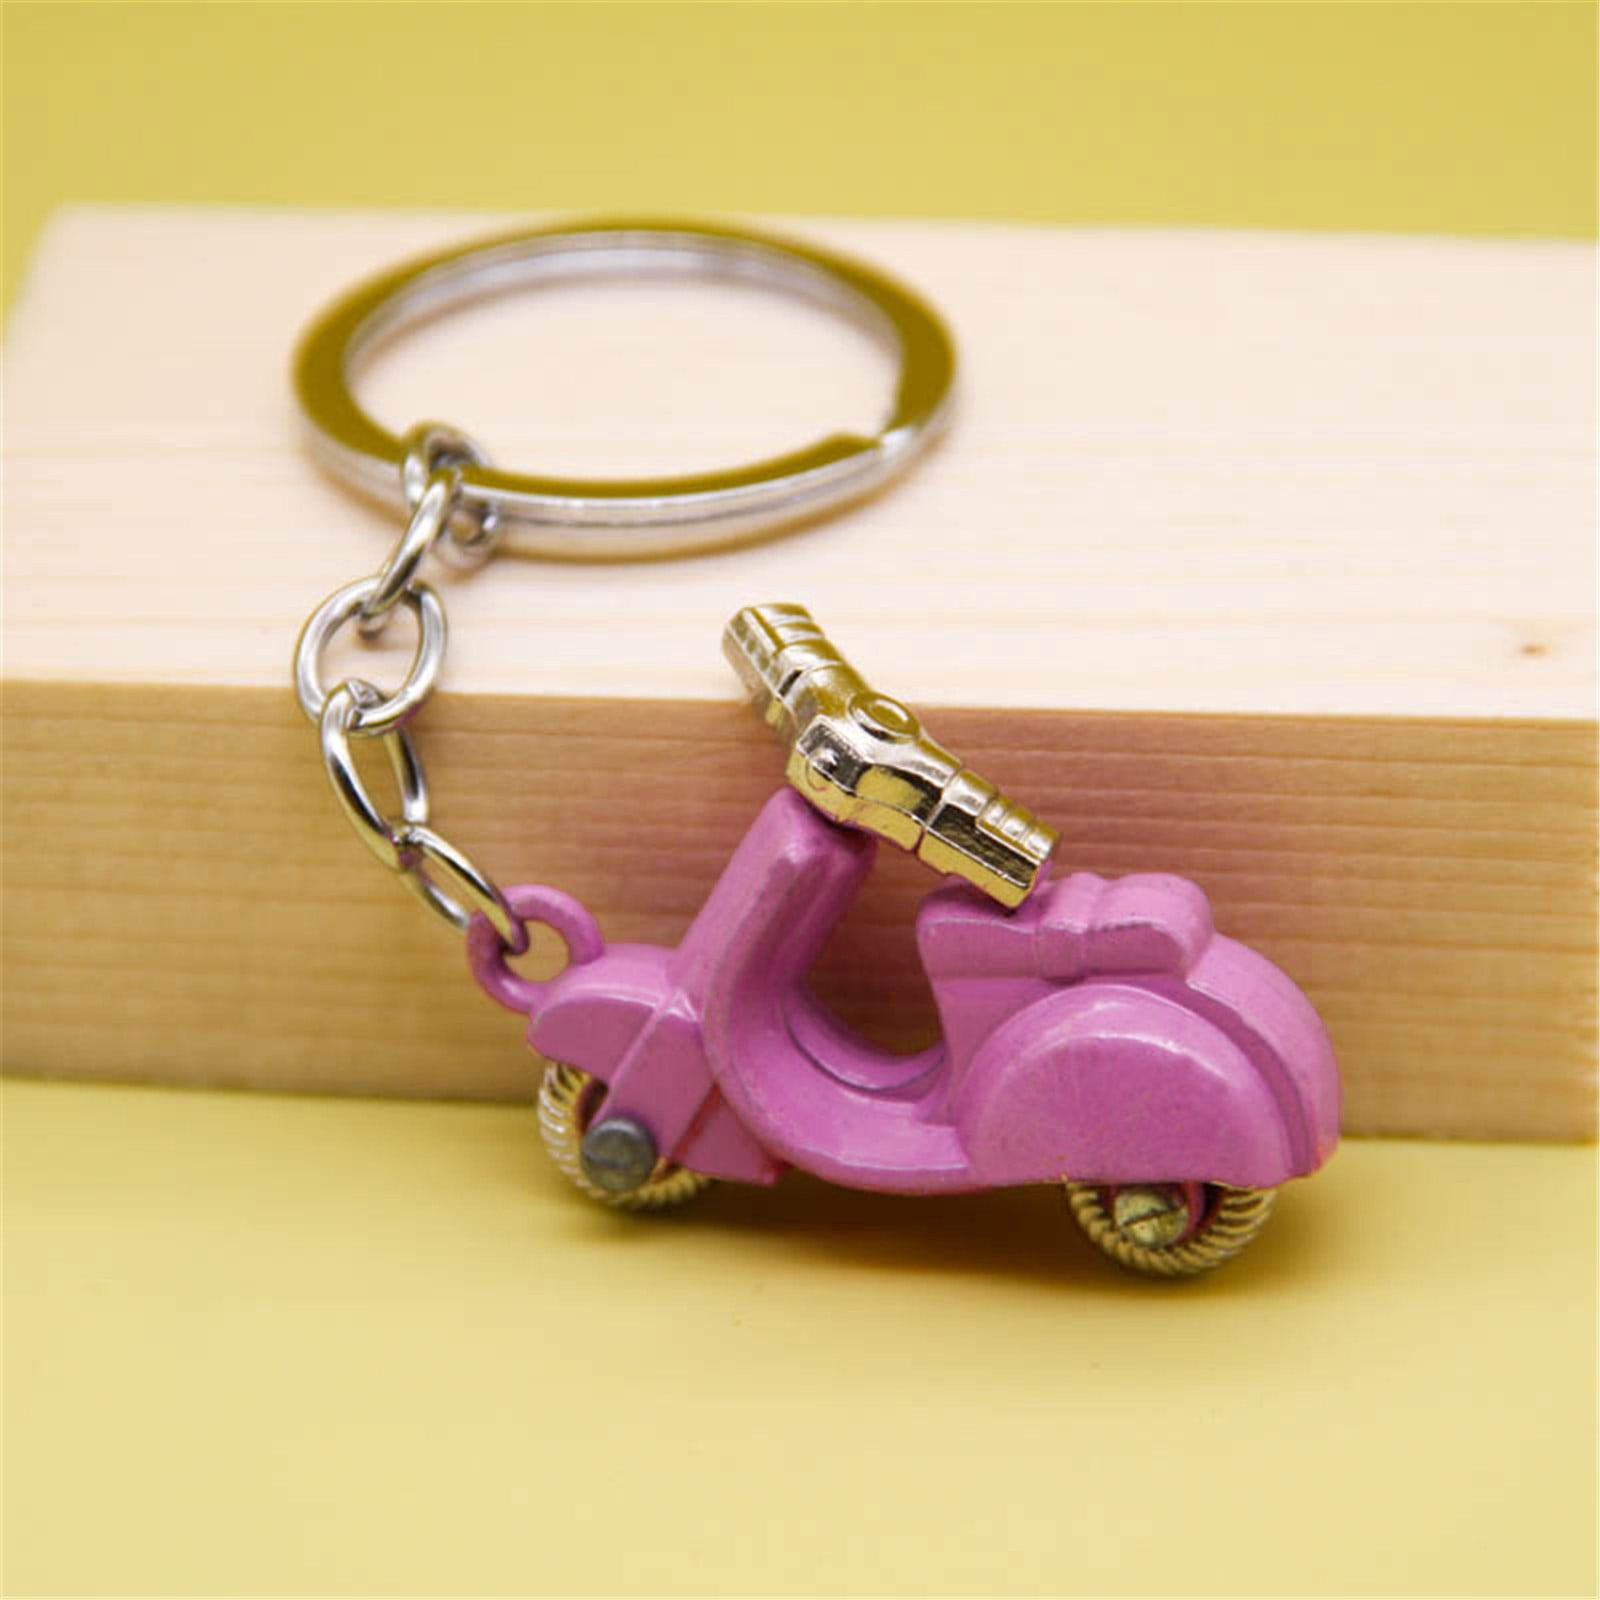  ERINGOGO 6 pcs Scooter keychain key rings for car keys micro  scooter metal decor scooter party favors scooter : Automotive